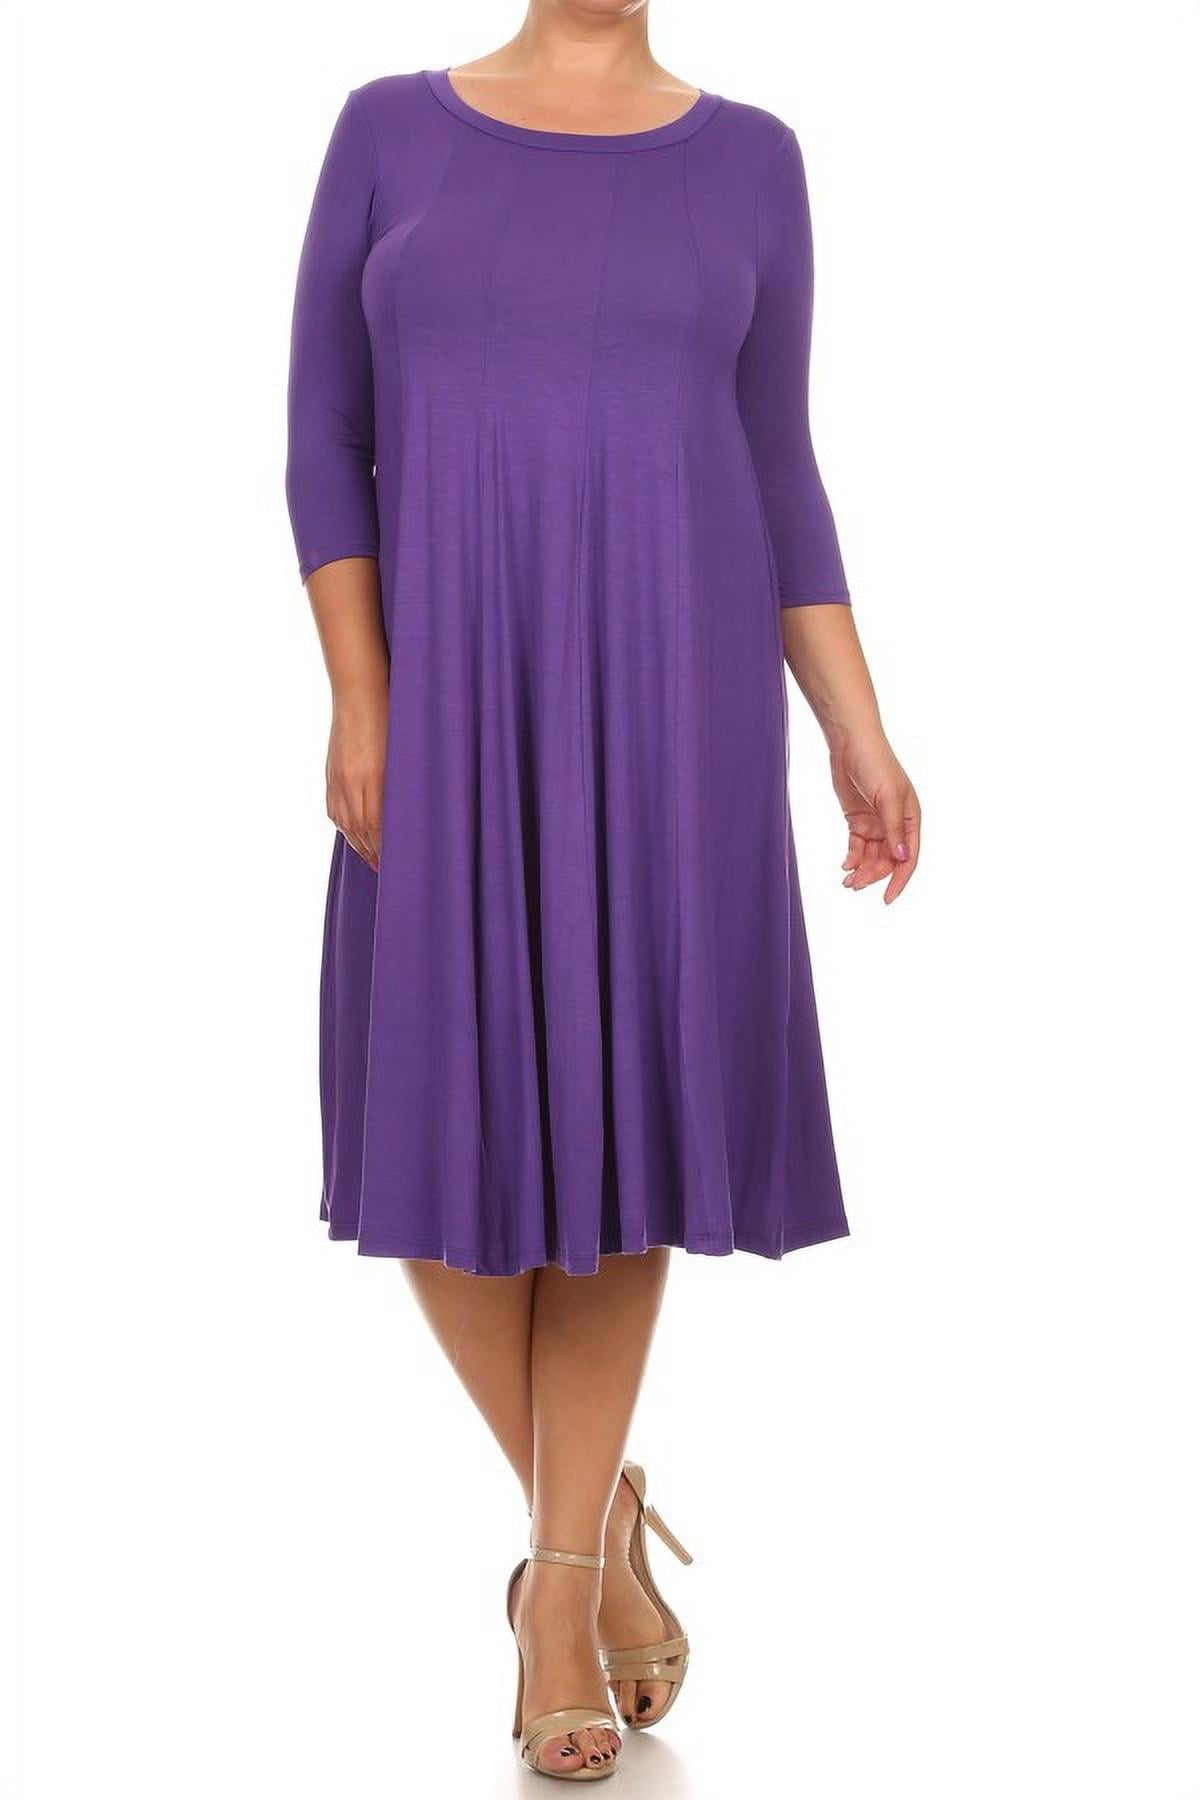 MOA Collection Plus Size Women's 3/4 Sleeves solid dress - Walmart.com